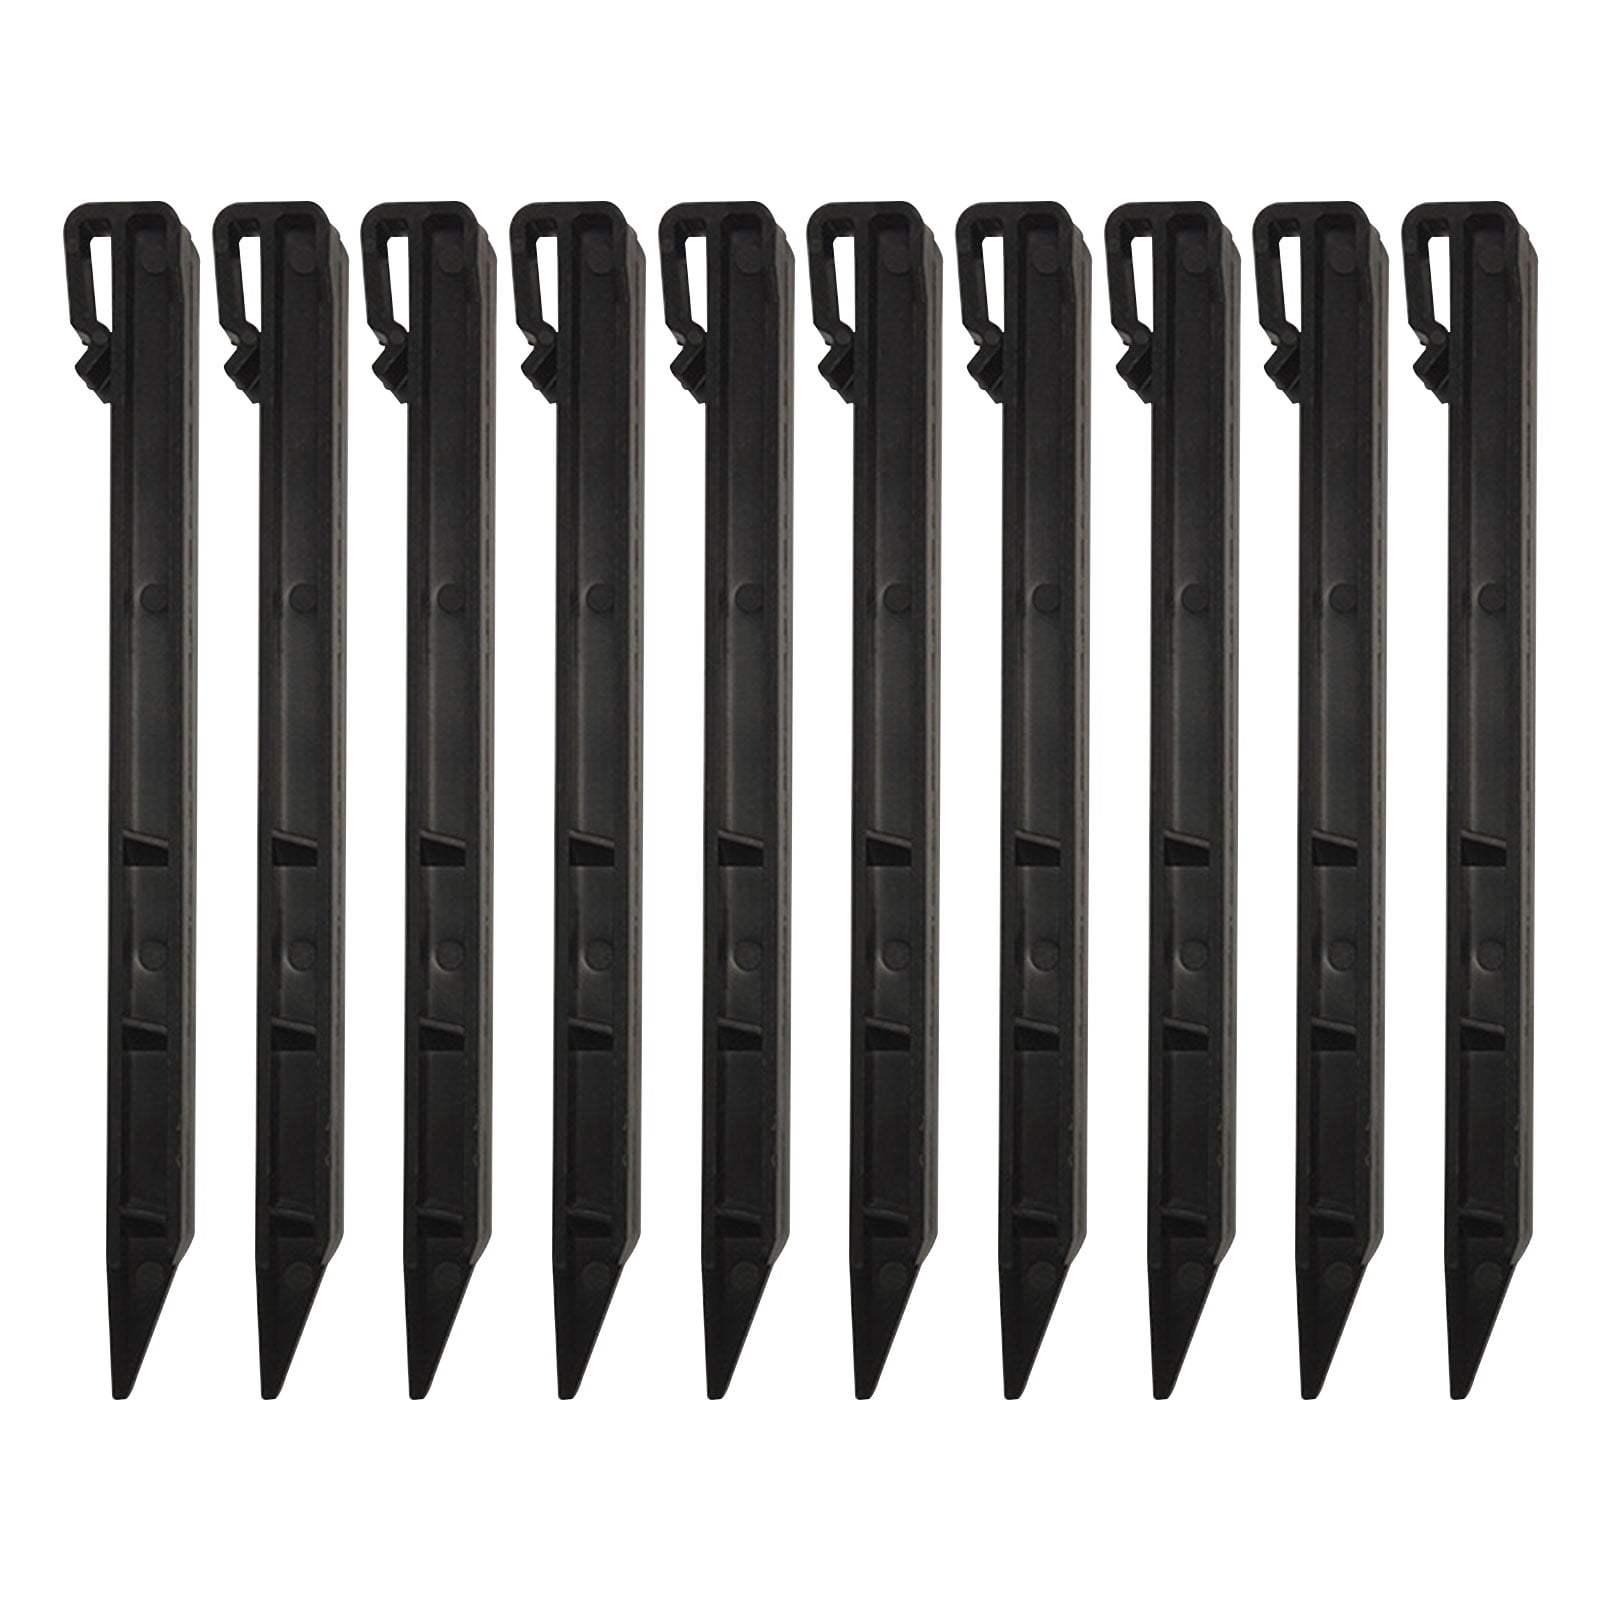 Weed Cover Black Tents Vaupan 20 PCS Plastic Landscape ​Anchoring Spikes 8 Inches Heavy Duty Garden Stakes Anchors for Holding Down Garden Netting Landscape Fabric Lawn Edging Tarps 